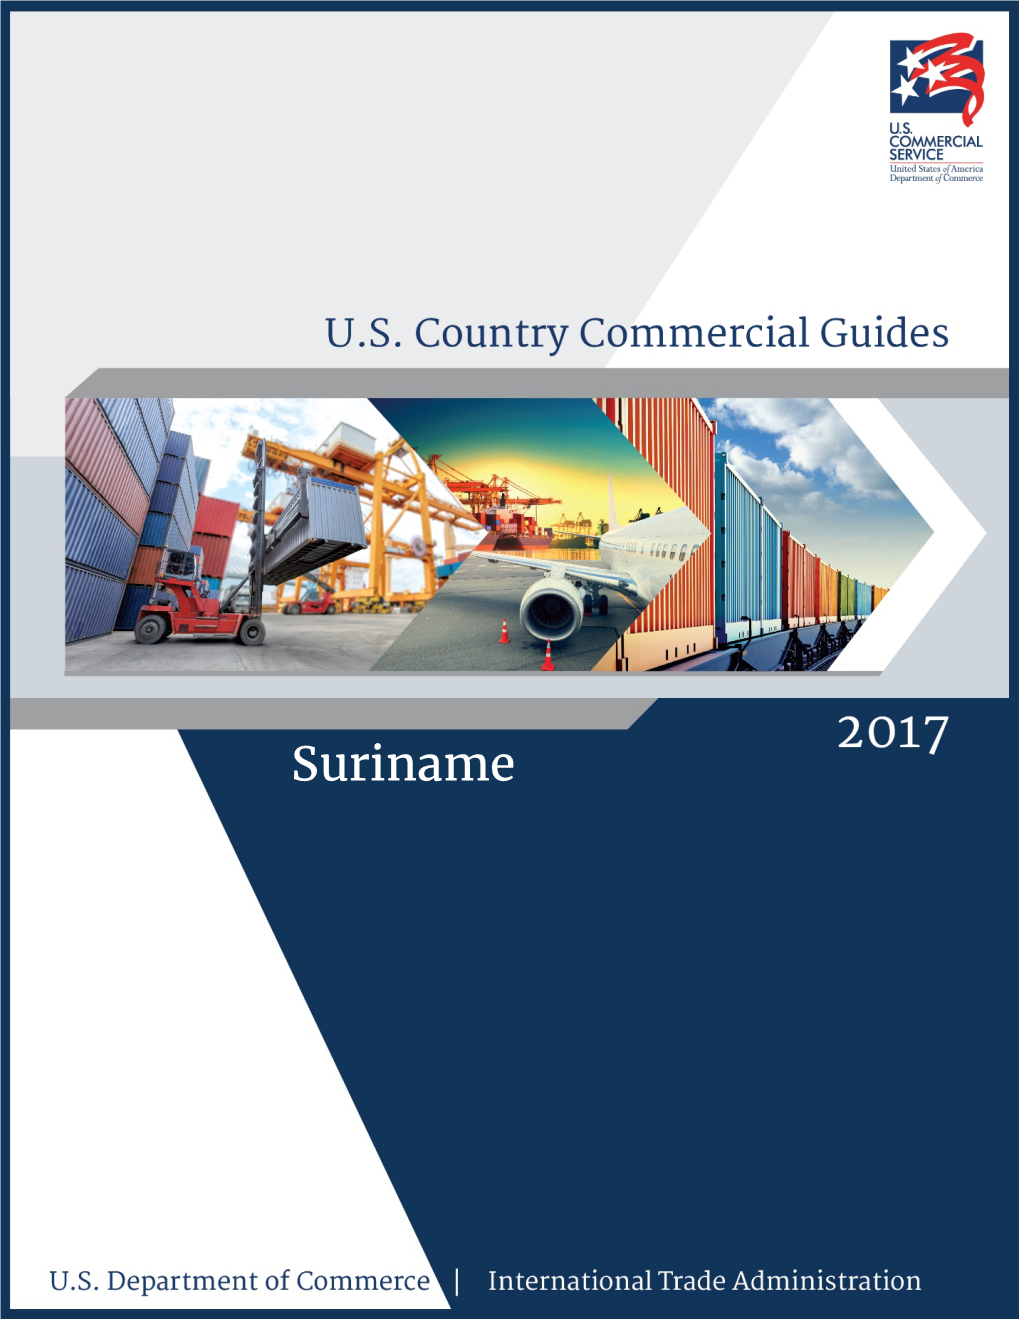 Suriname Commercial Guide